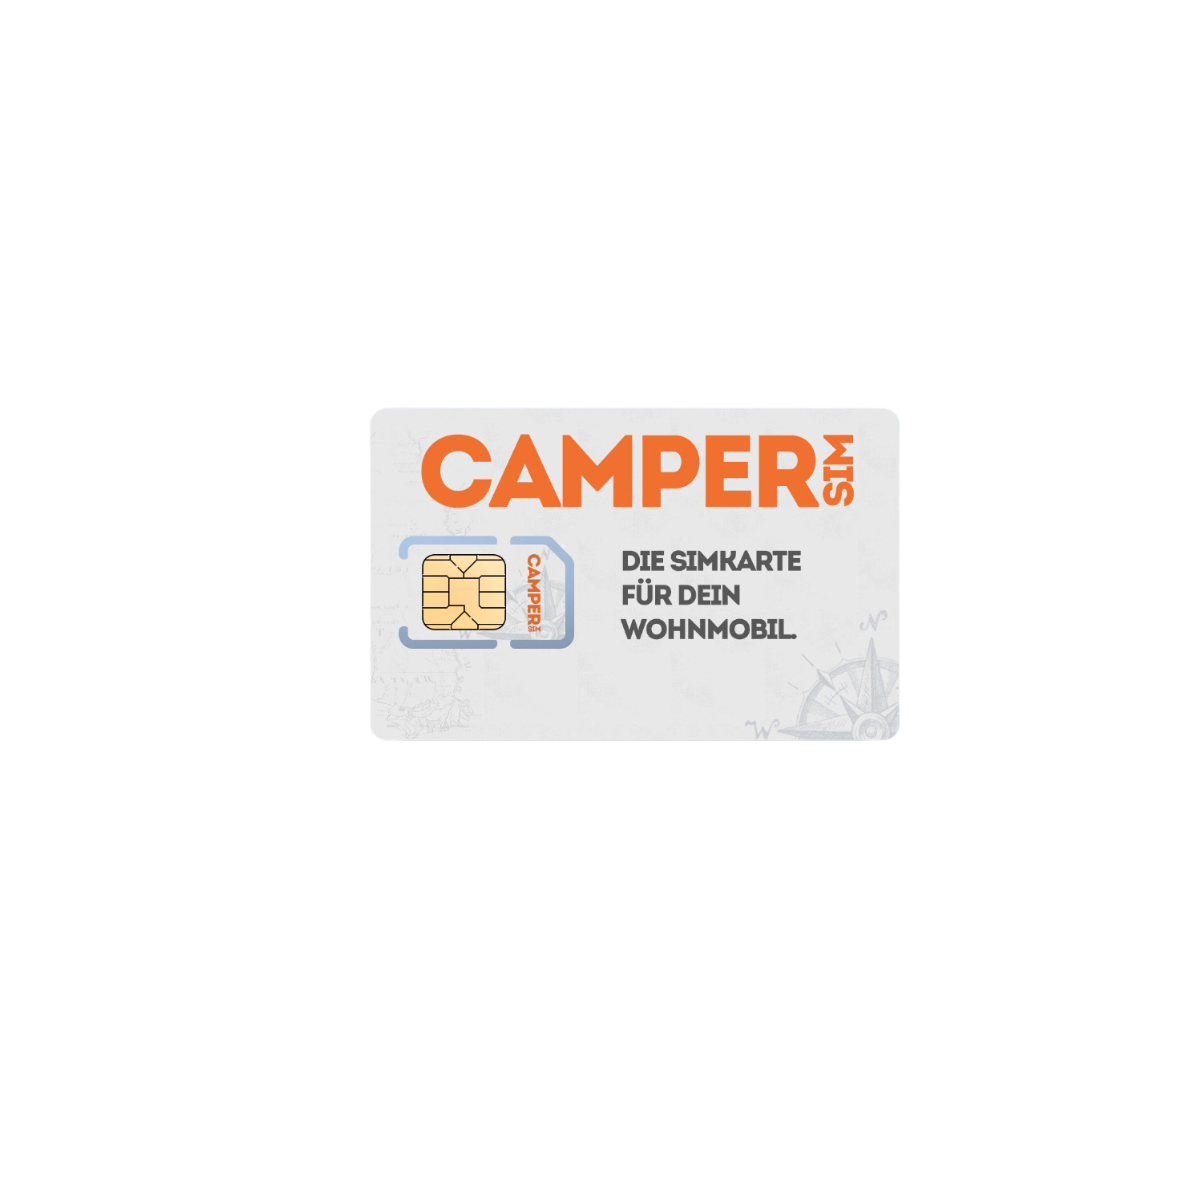 PIONEER WIFI-Router DCT-WR204-SH mit Dachantenne inkl. CAMPER SIM 10 GB Special Edition